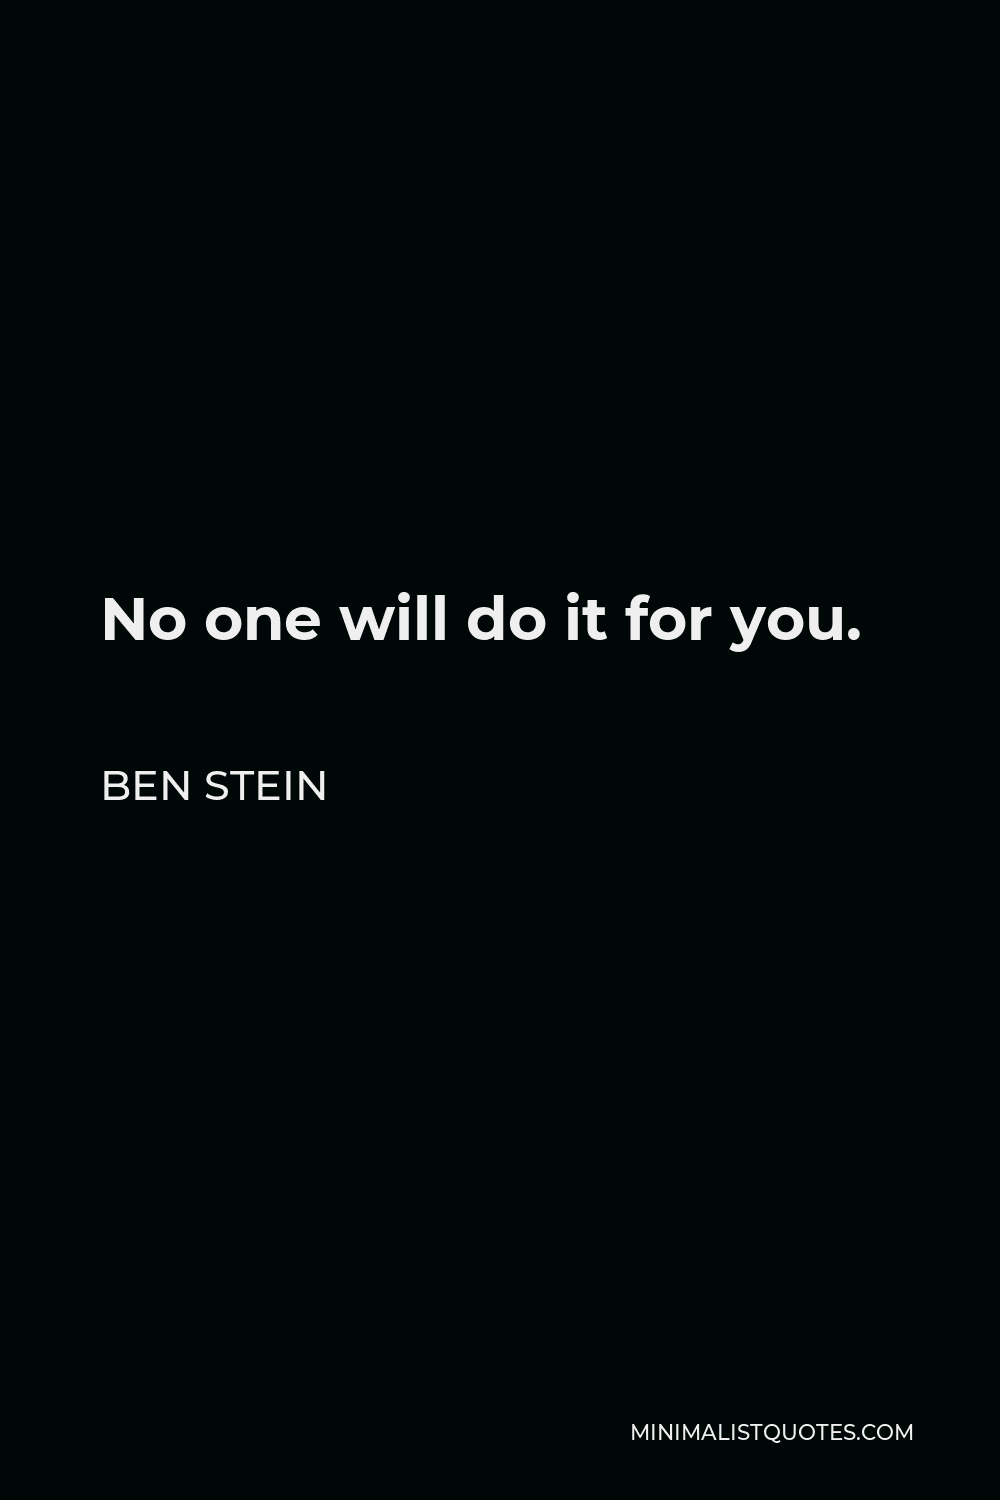 Ben Stein Quote - No one will do it for you.